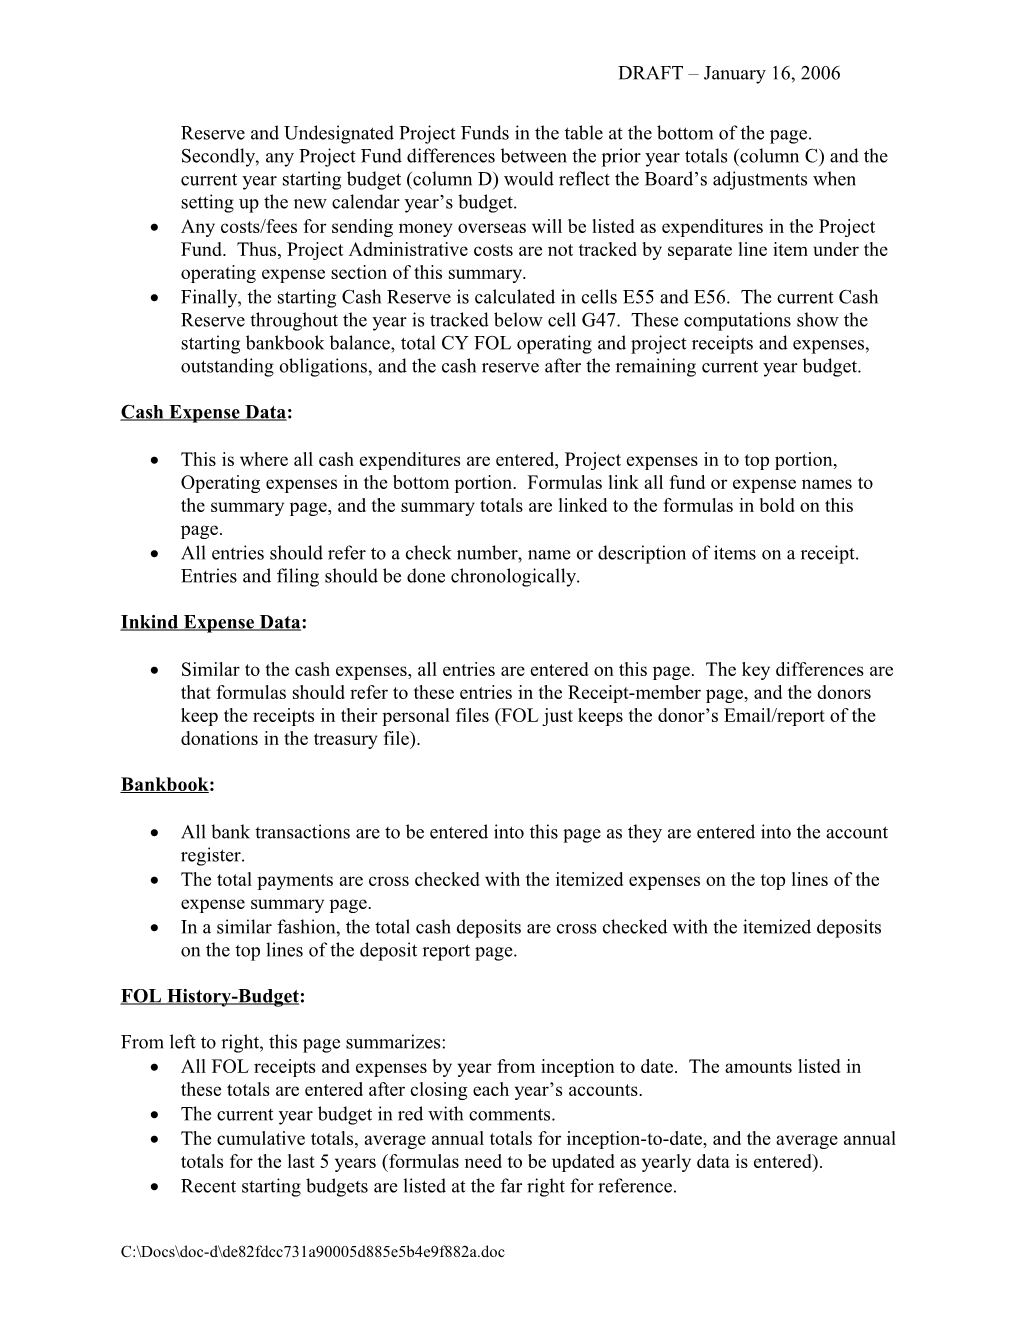 Reference Notes for FOL 2006 Treasury Database